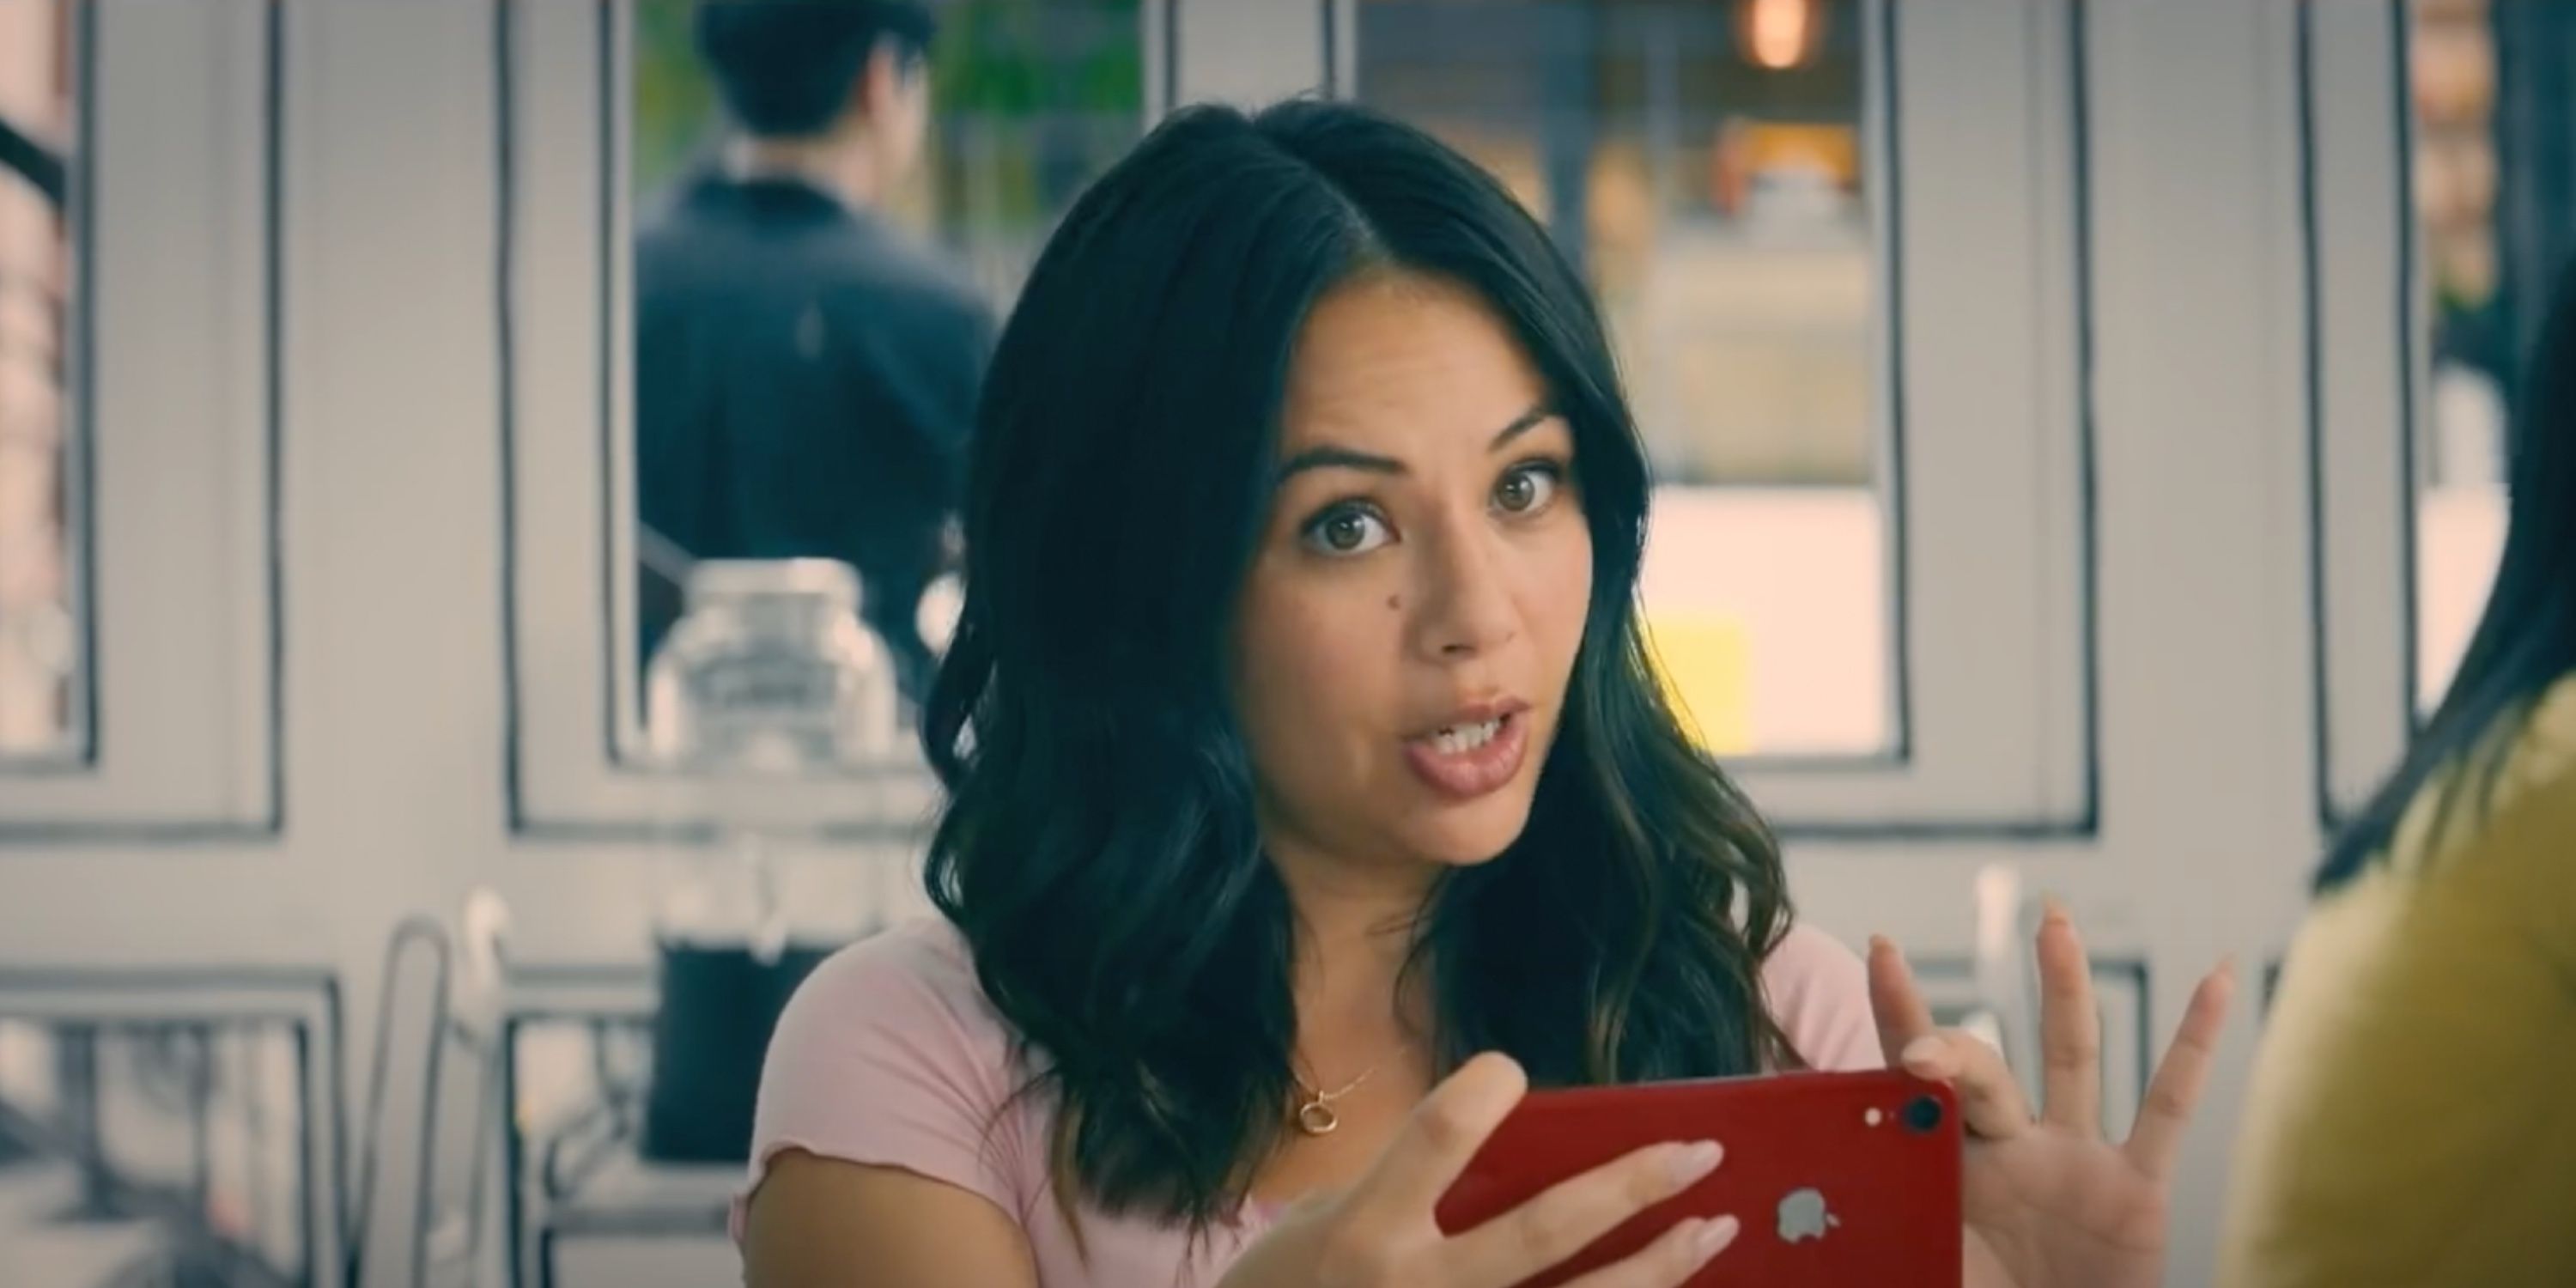 Janel Parrish in To All the Boys: Always and Forever on Netflix